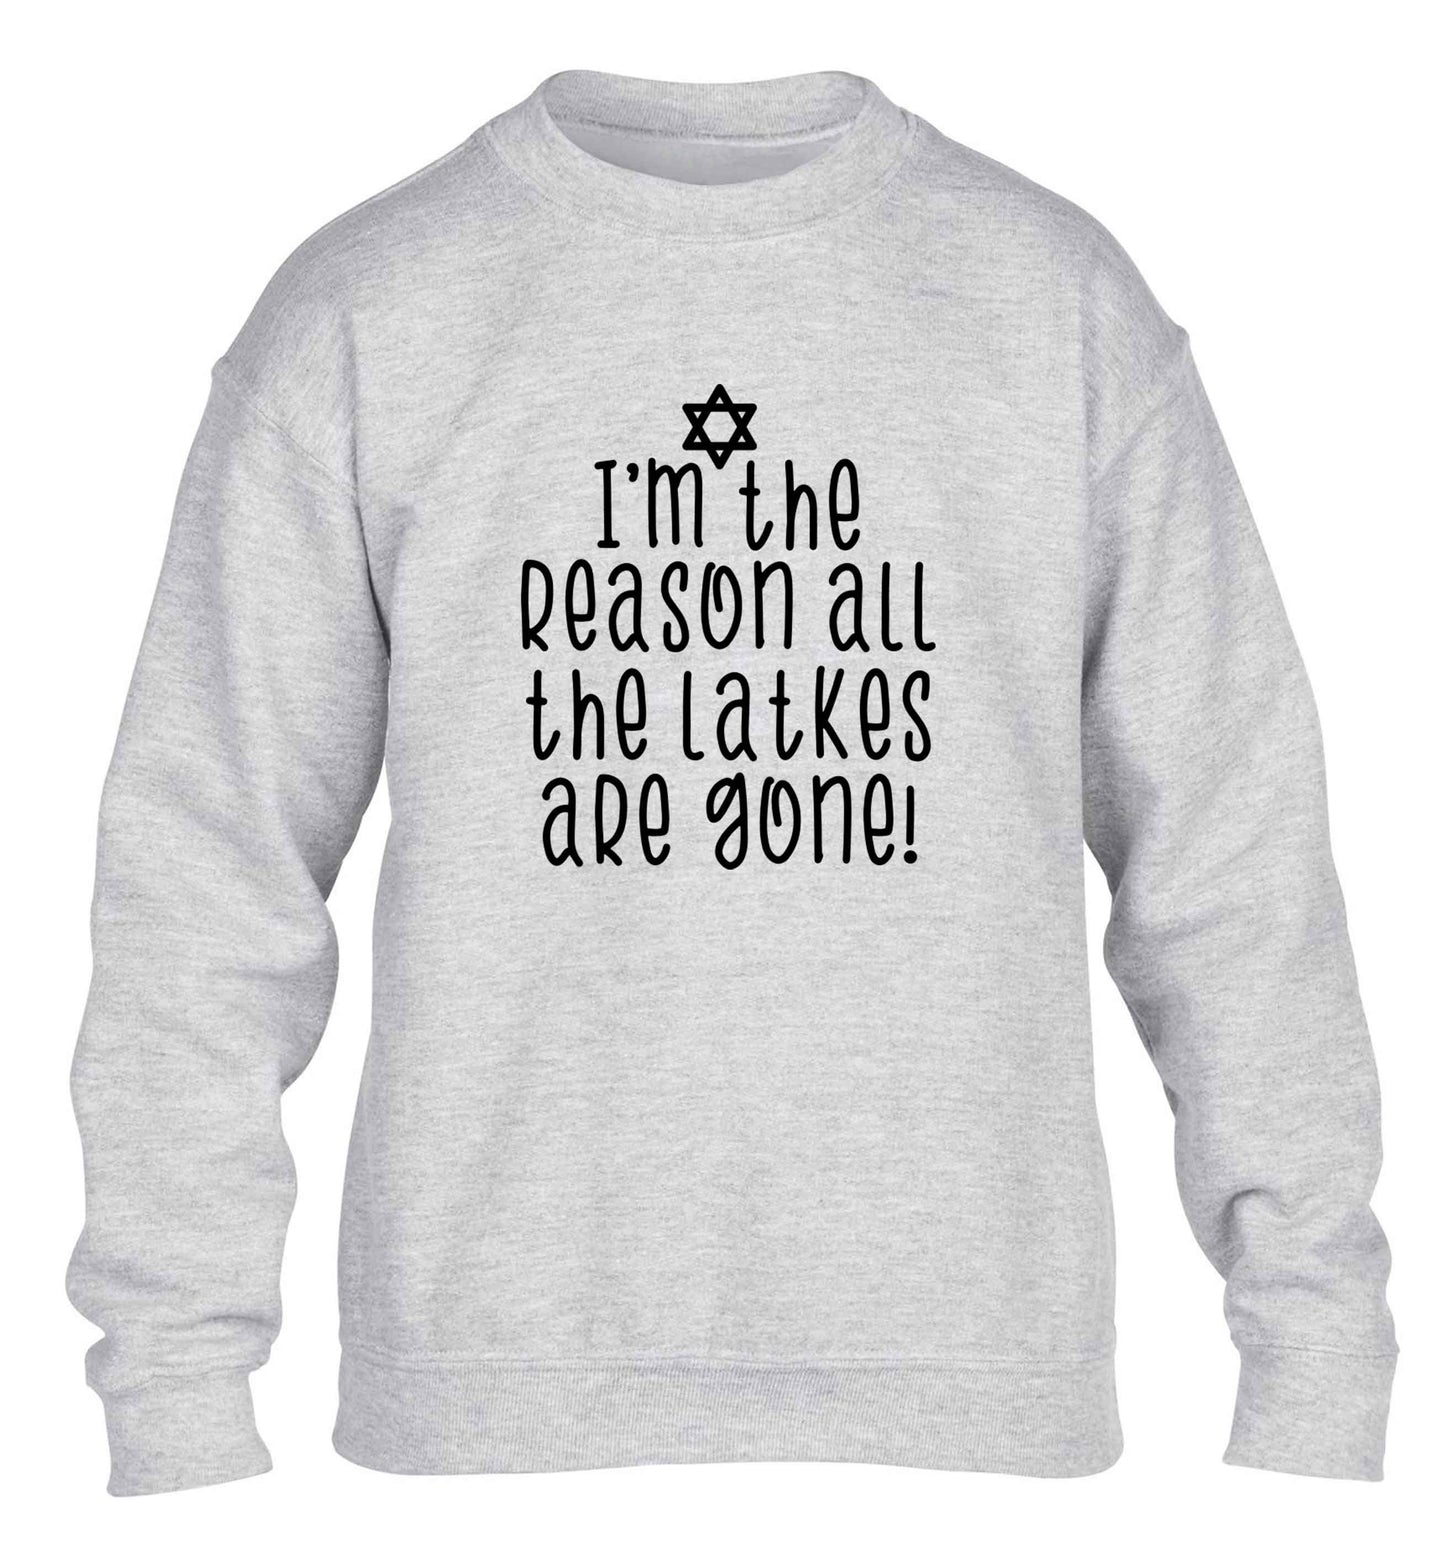 I'm the reason all the latkes are gone children's grey sweater 12-13 Years